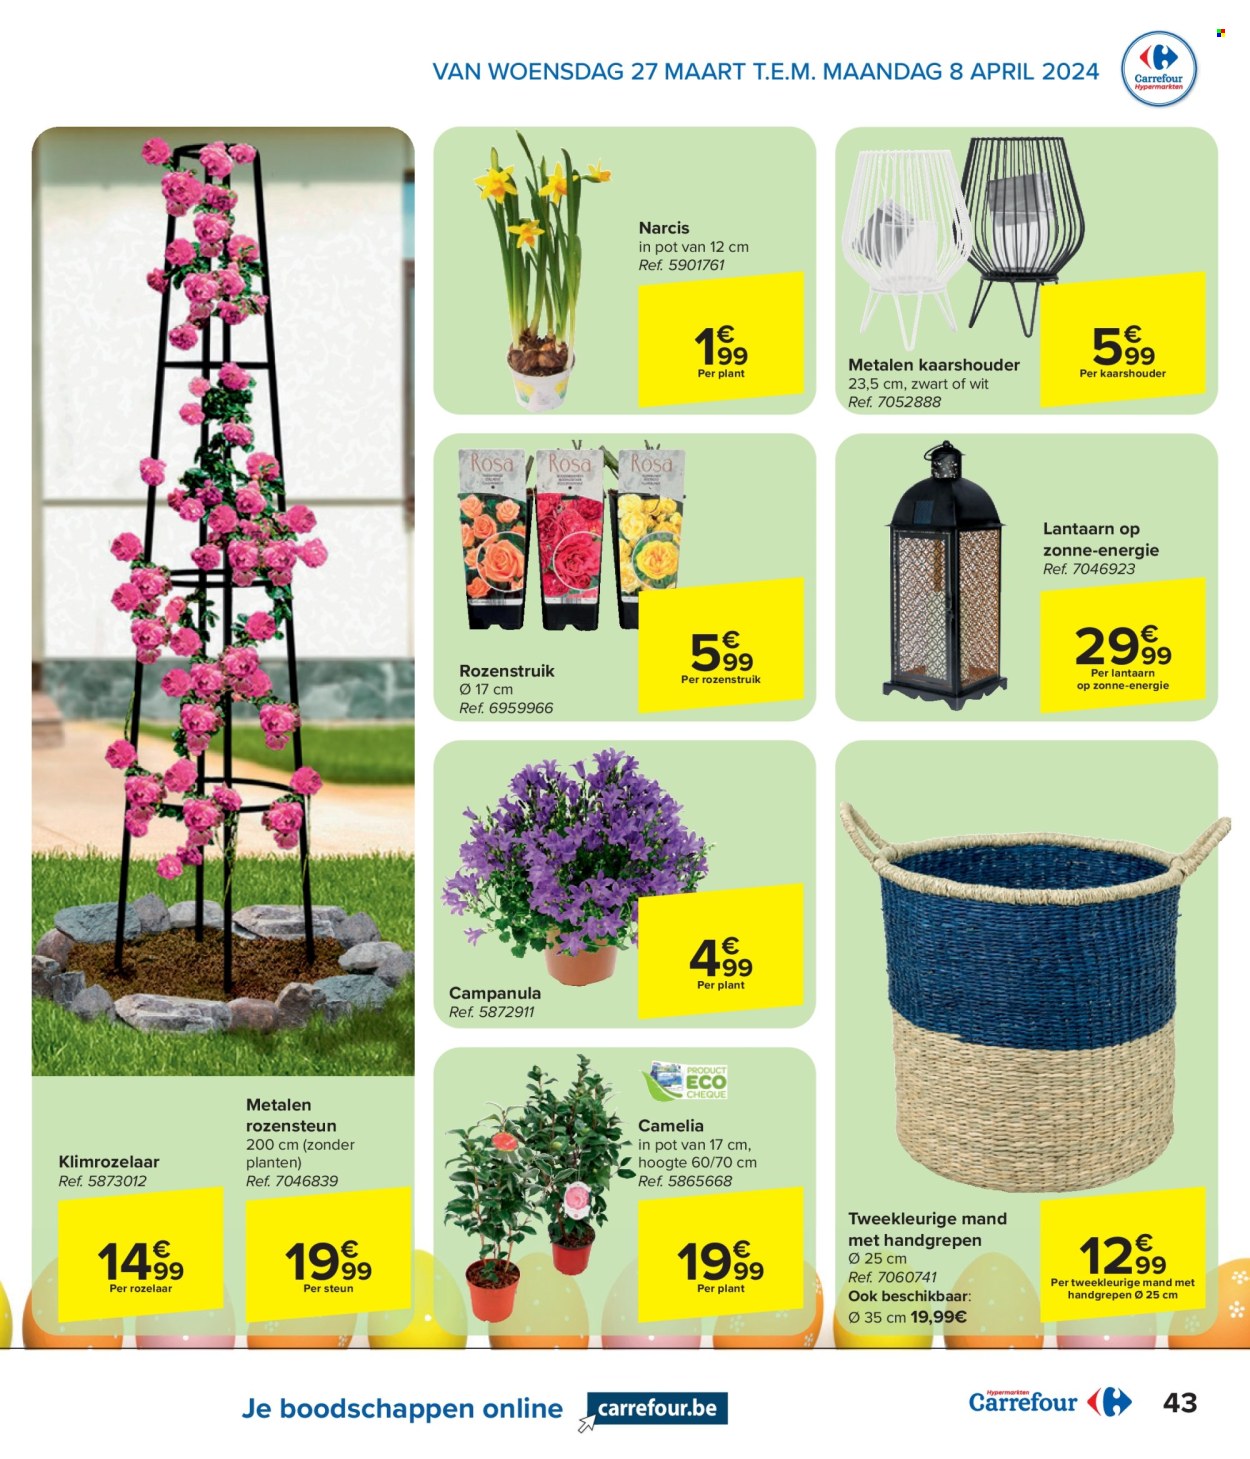 Catalogue Carrefour hypermarkt - 27.3.2024 - 8.4.2024. Page 43.